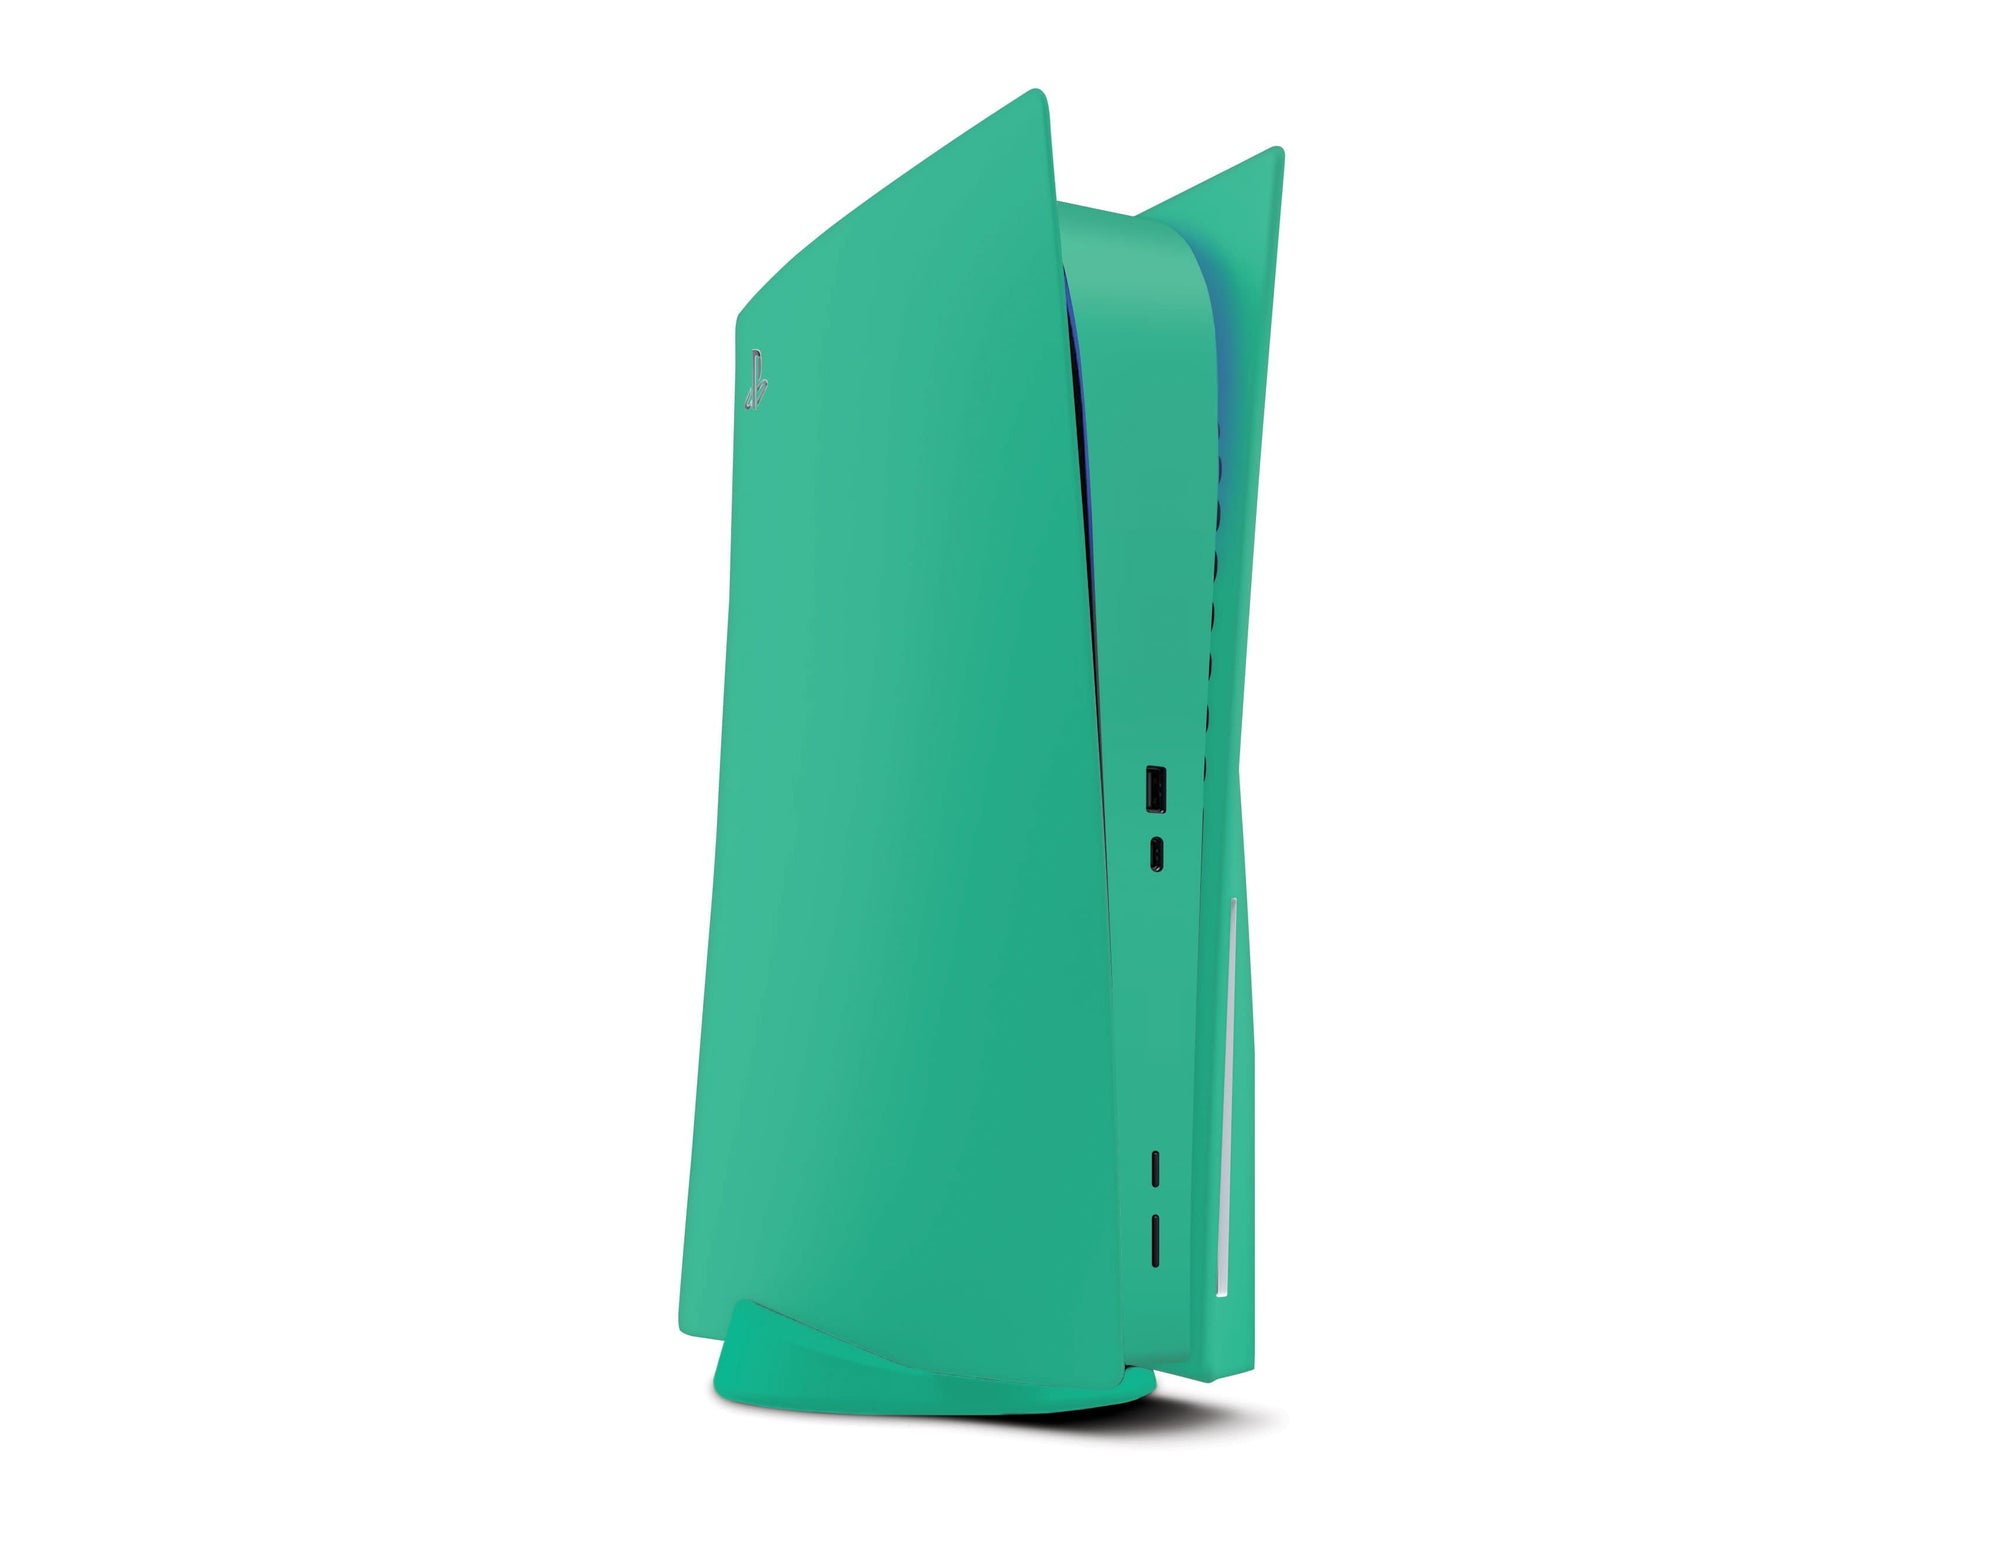 Classic Solid Color PS5 Disc Edition Skin